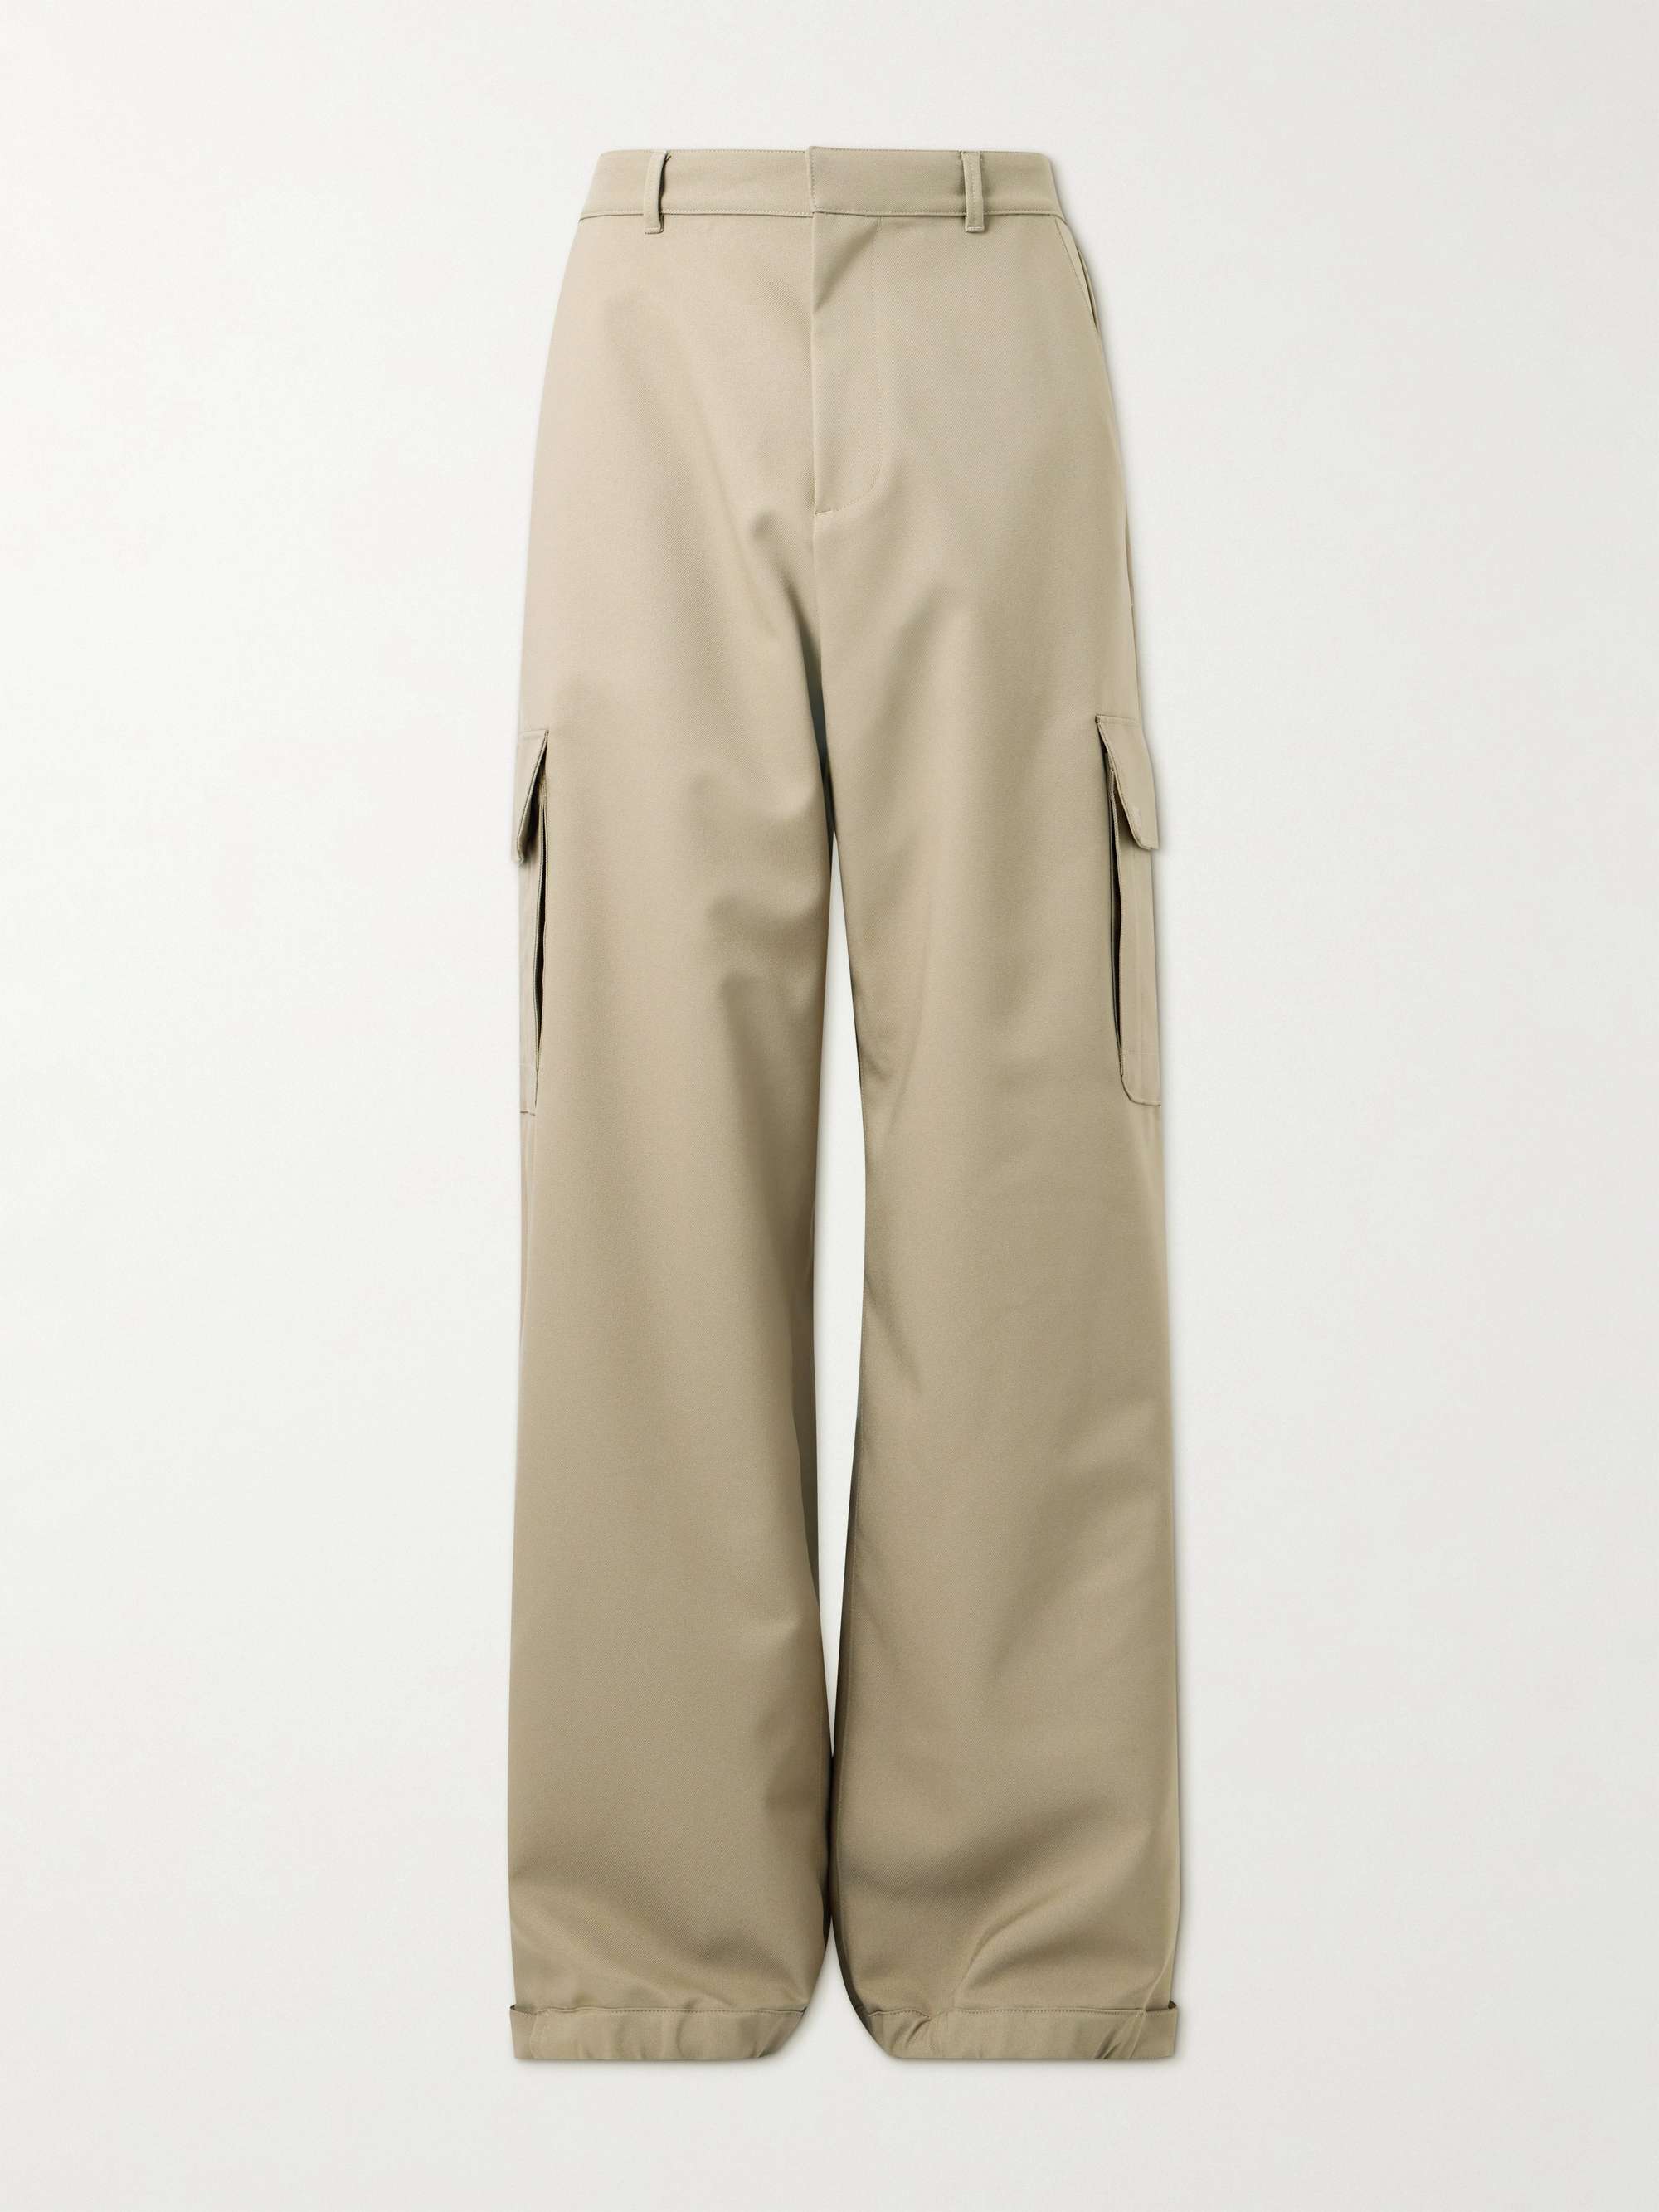 New Look relaxed fit linen suit pants in off white | ASOS